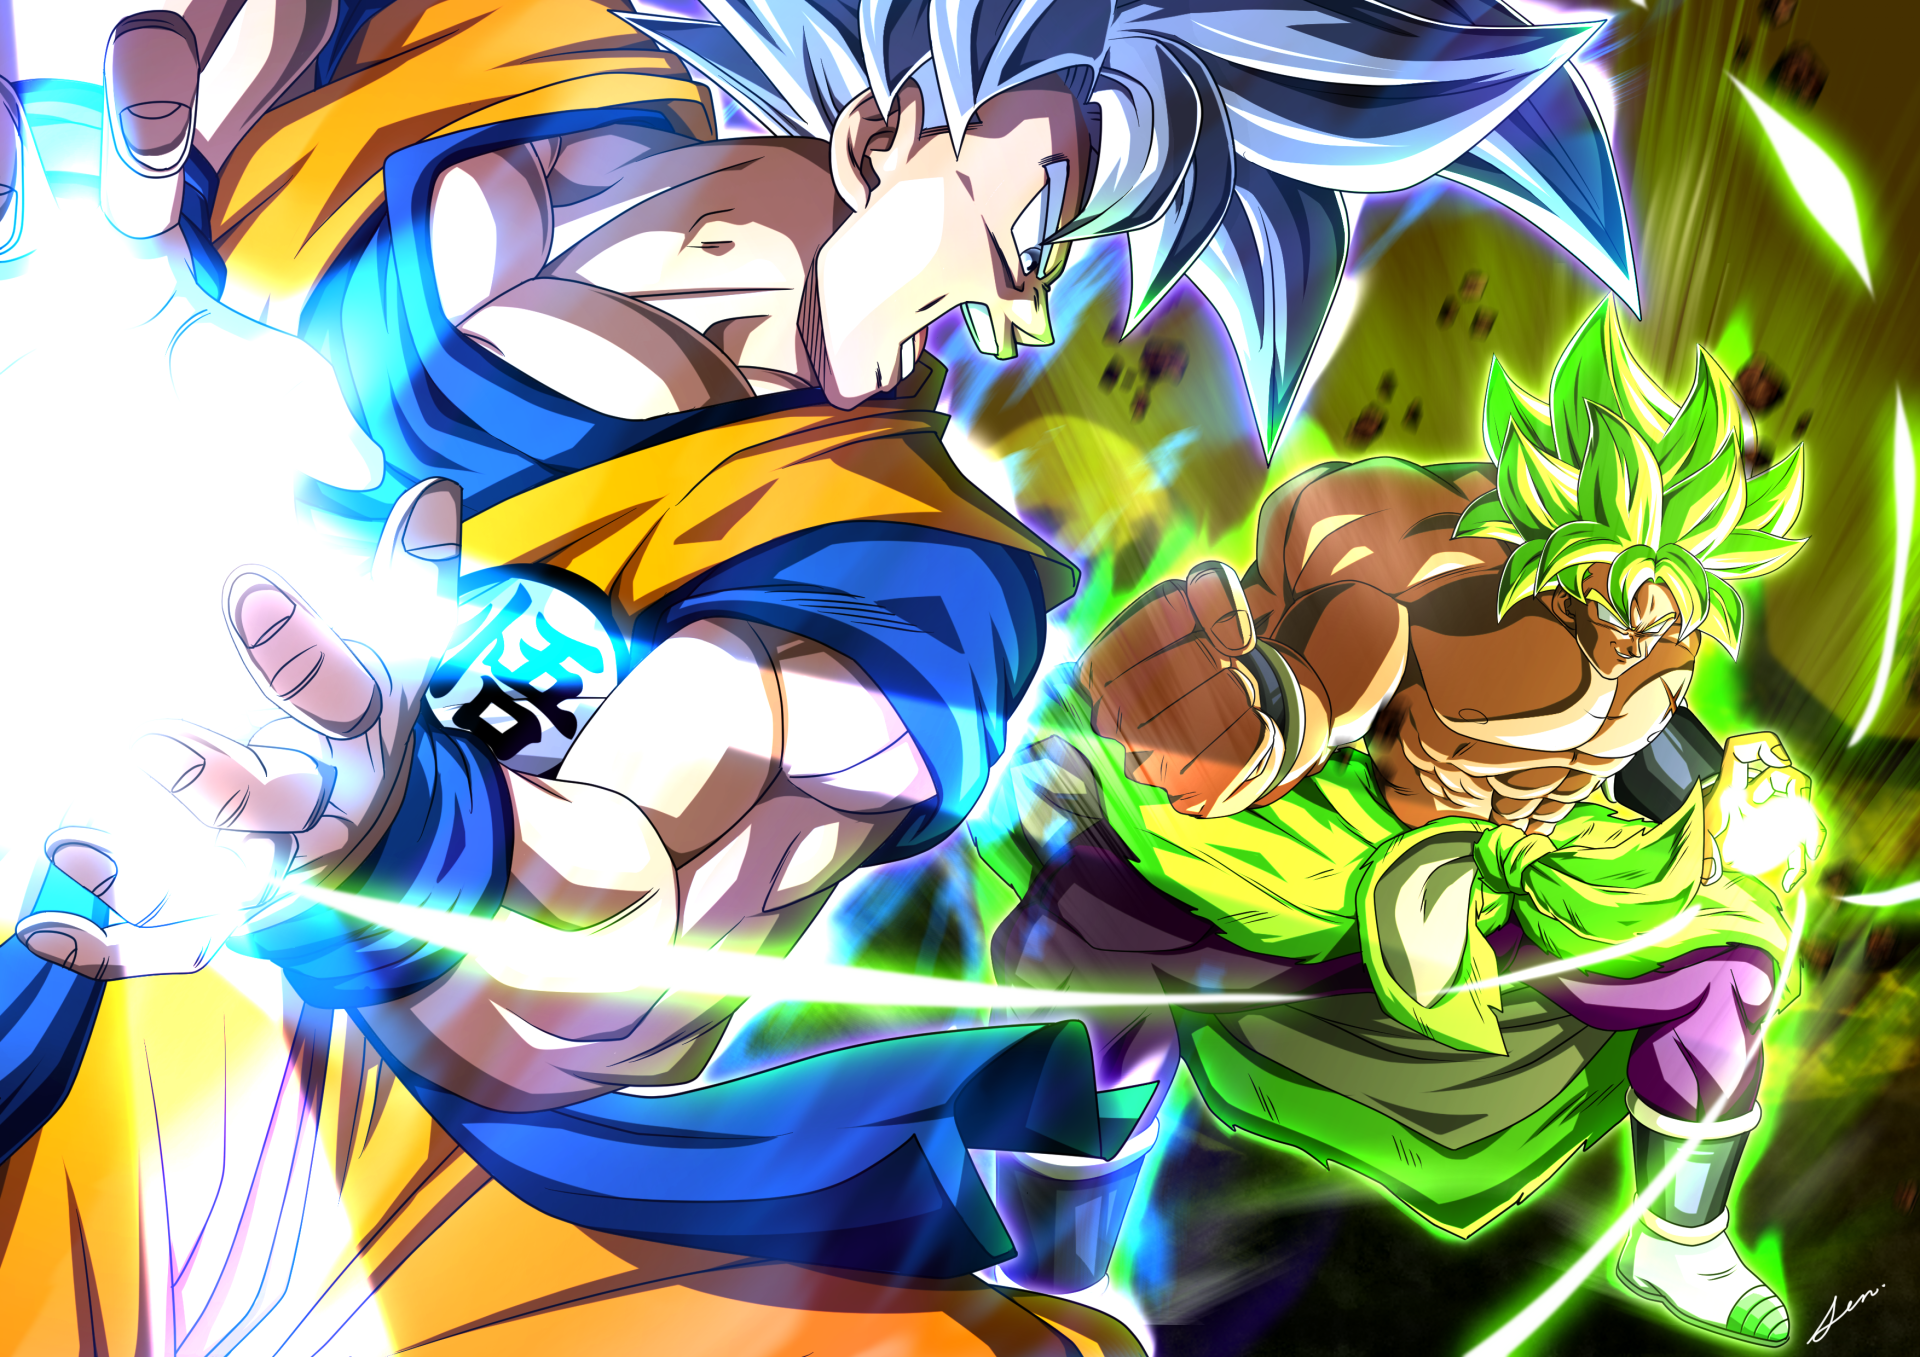 Goku Vs Broly Wallpaper Background Image. View, download, comment, and rate. ドラゴンボールz, イラスト, ドラゴンボール